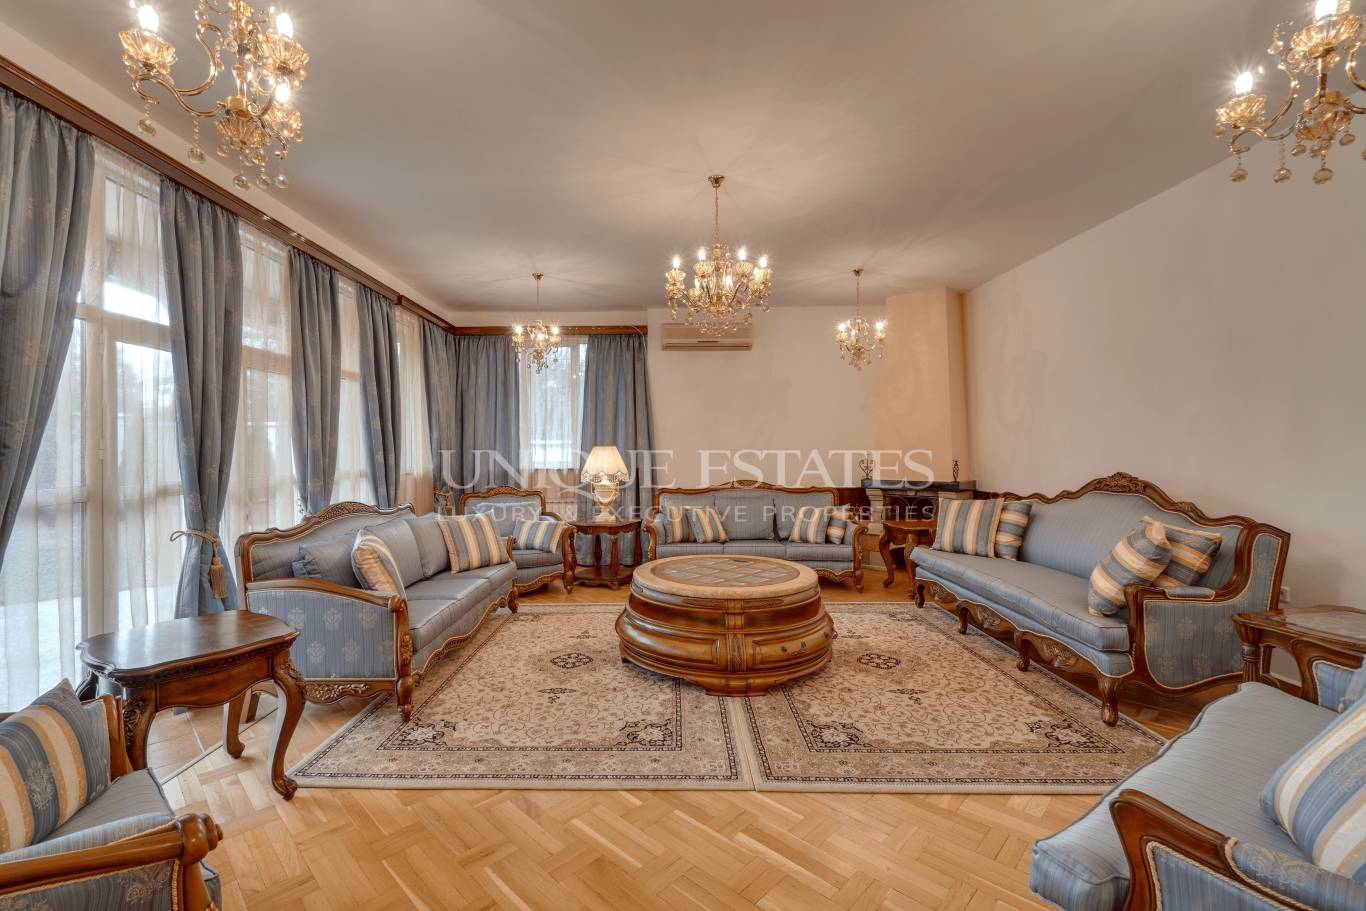 House for rent in Sofia, Vitosha with listing ID: K2058 - image 3